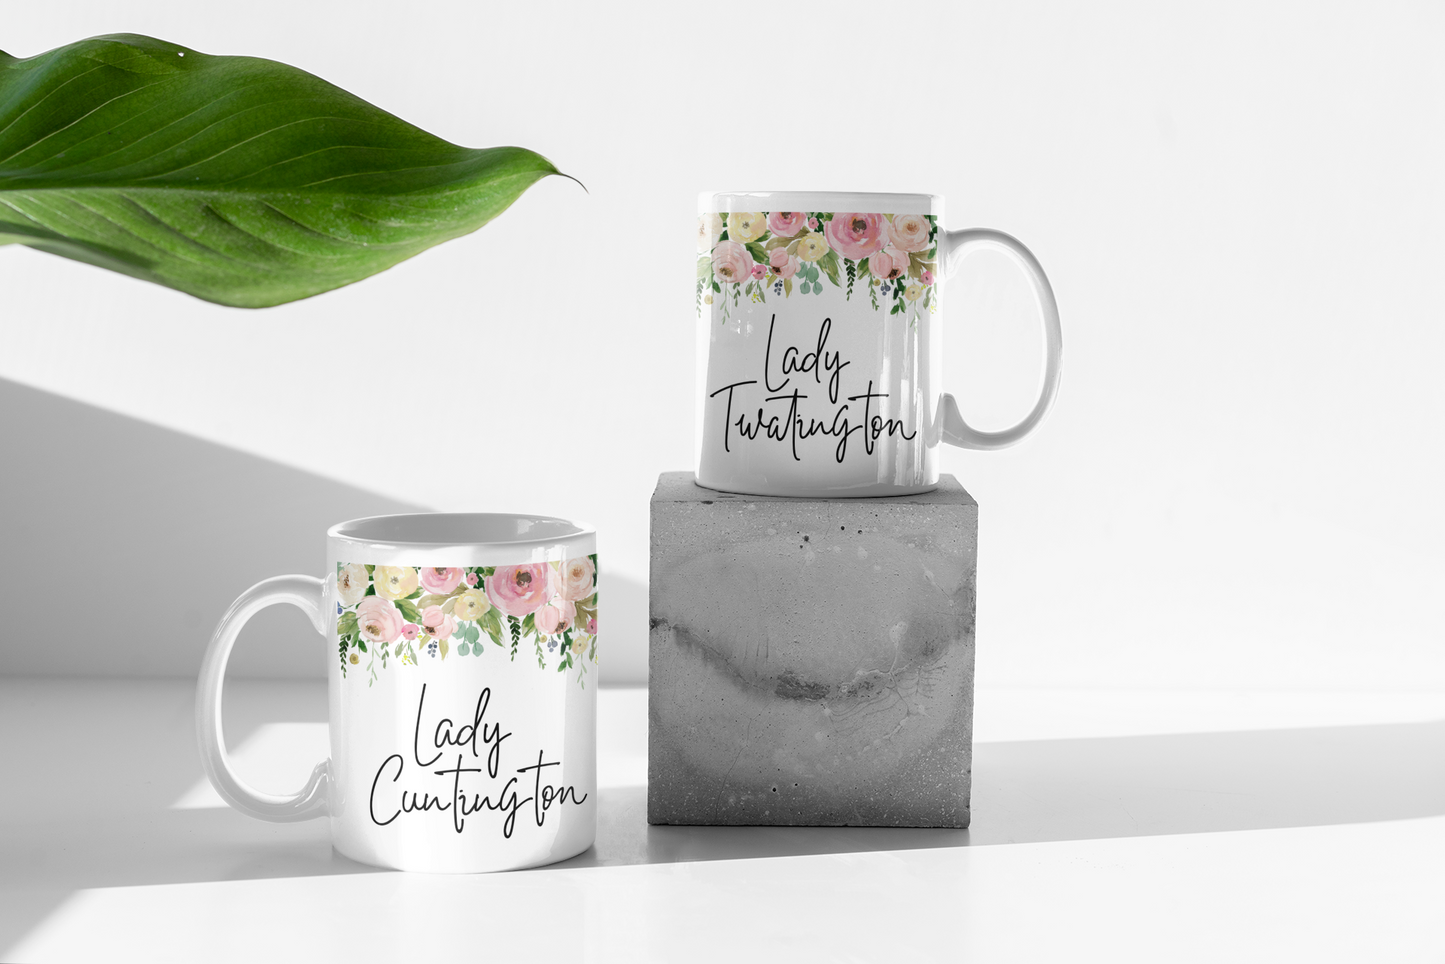 Two white mugs with a colourful floral border to the top. Underneath is the quote lady cuntington on one and lady twatington on the other.